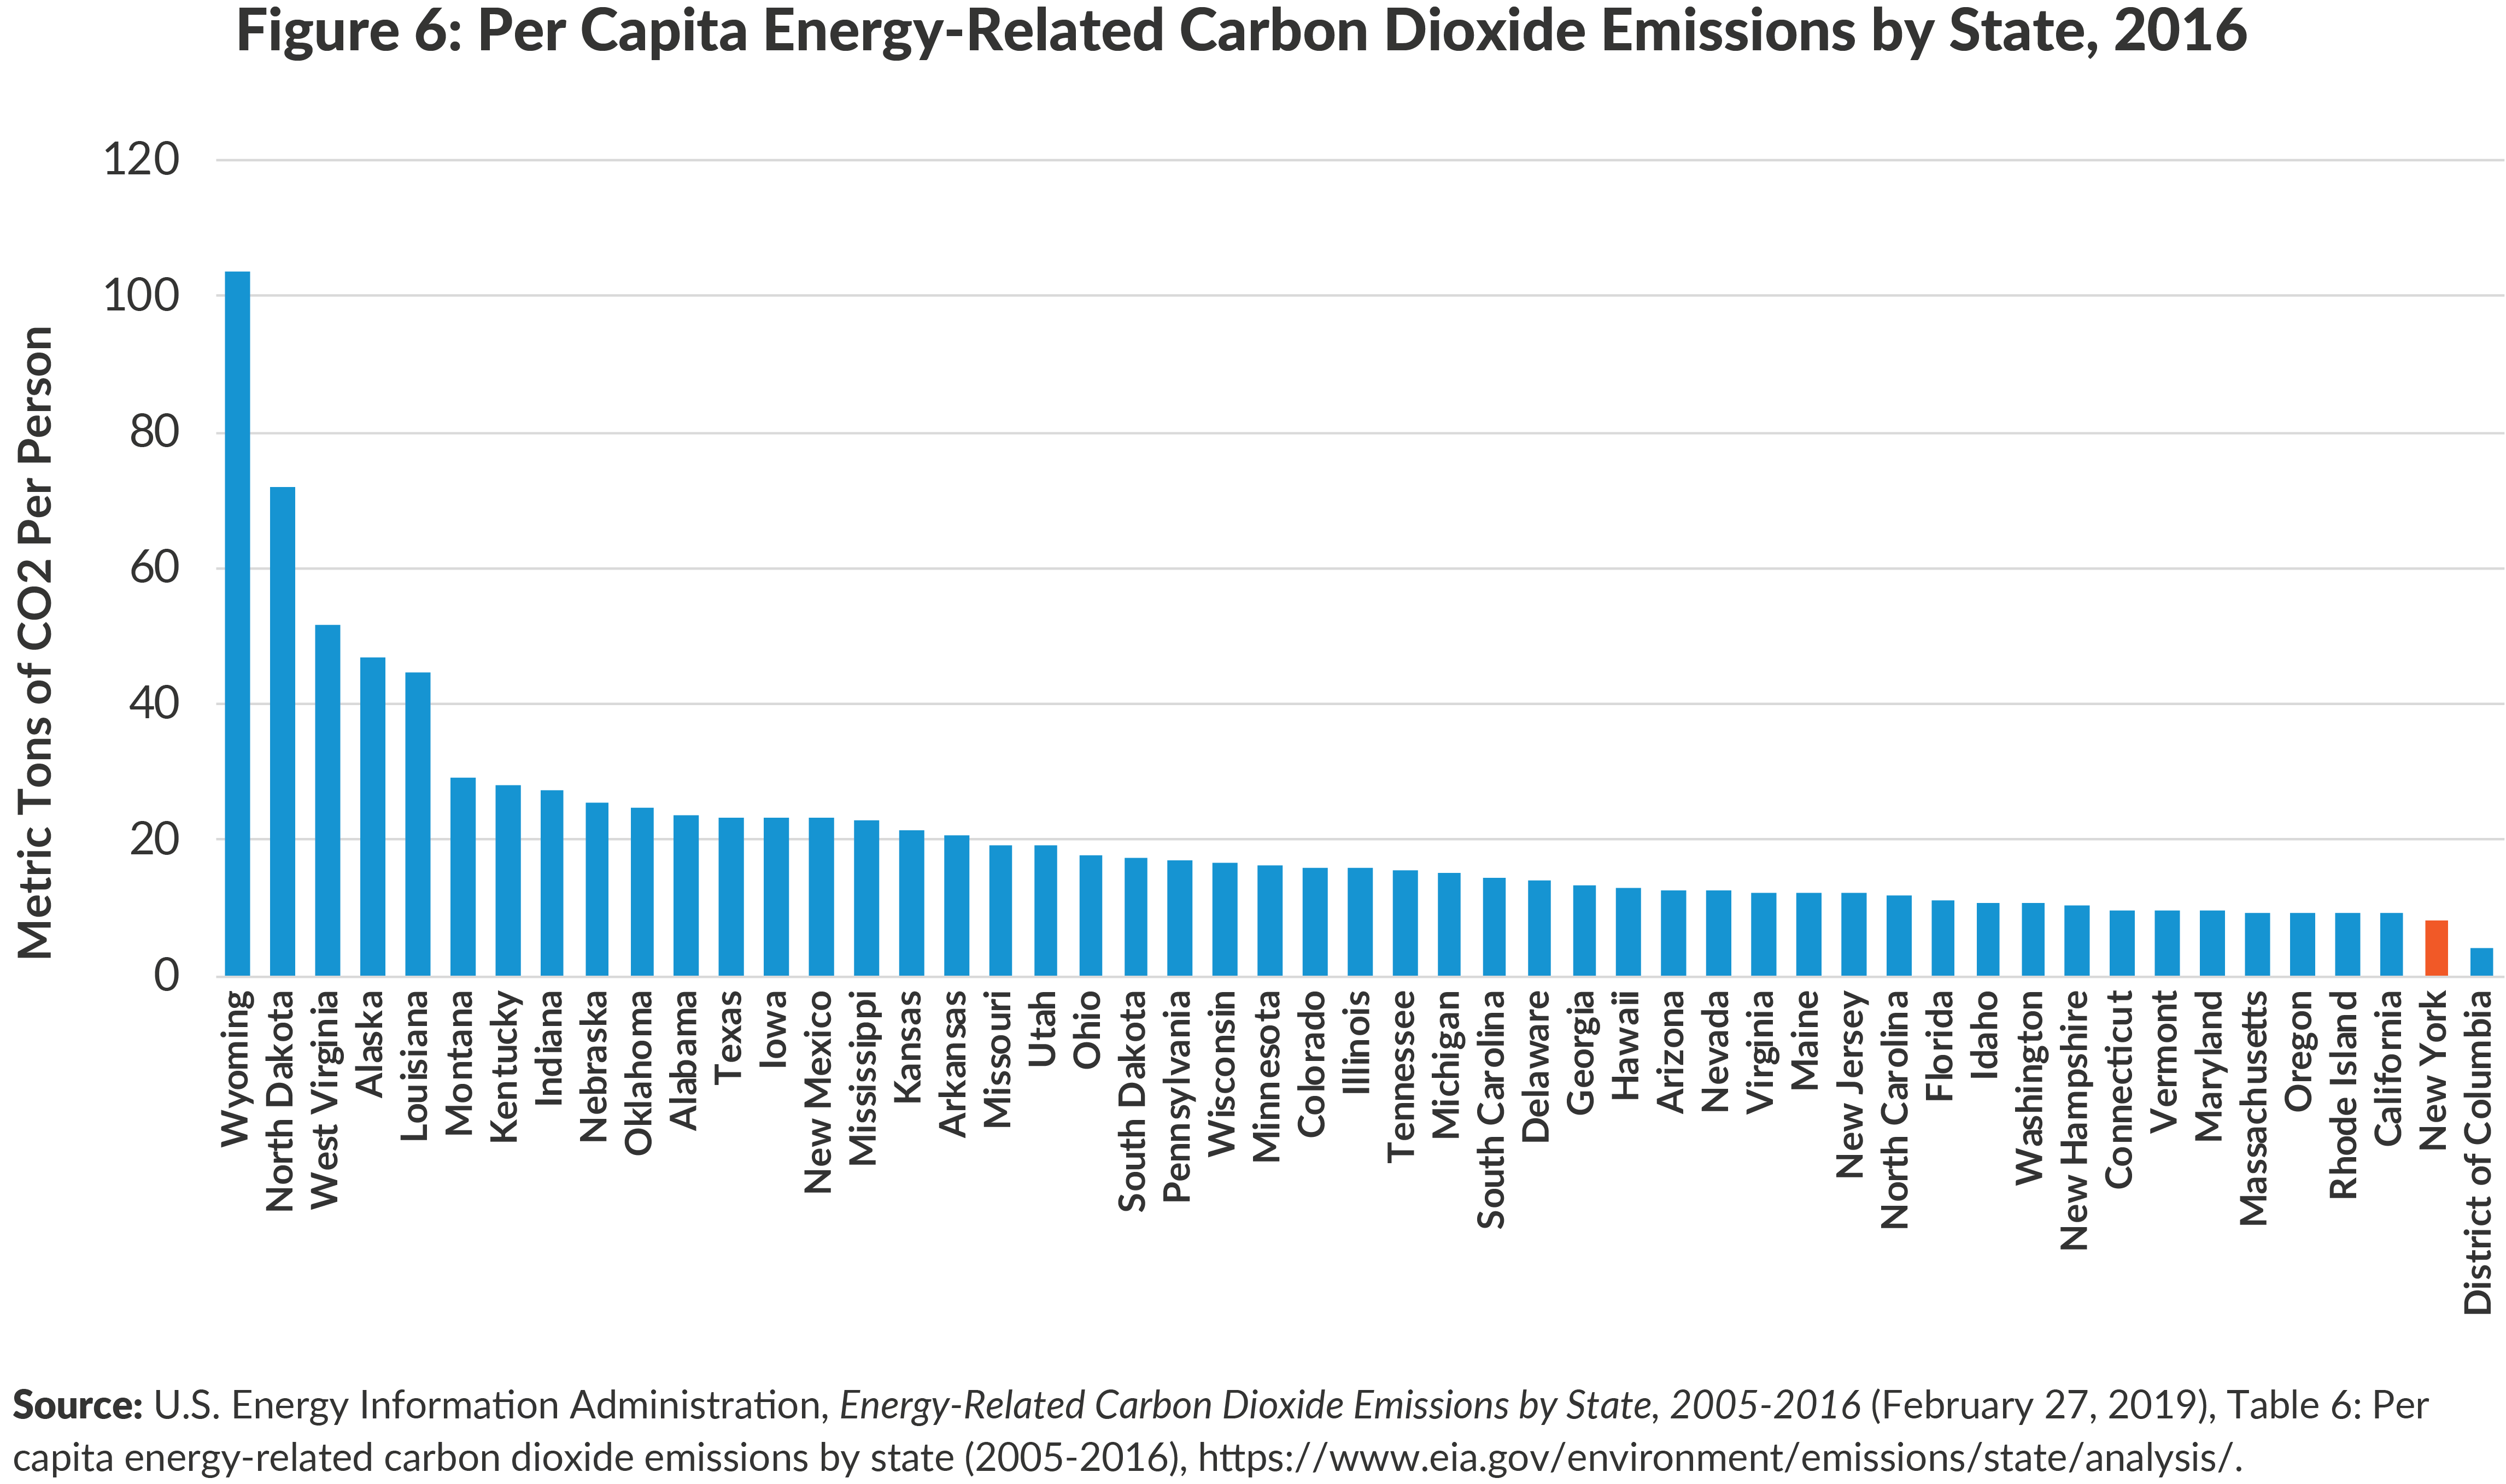 Figure 6: Per Capita Energy-Related Carbon Dioxide Emissions by State, 2016